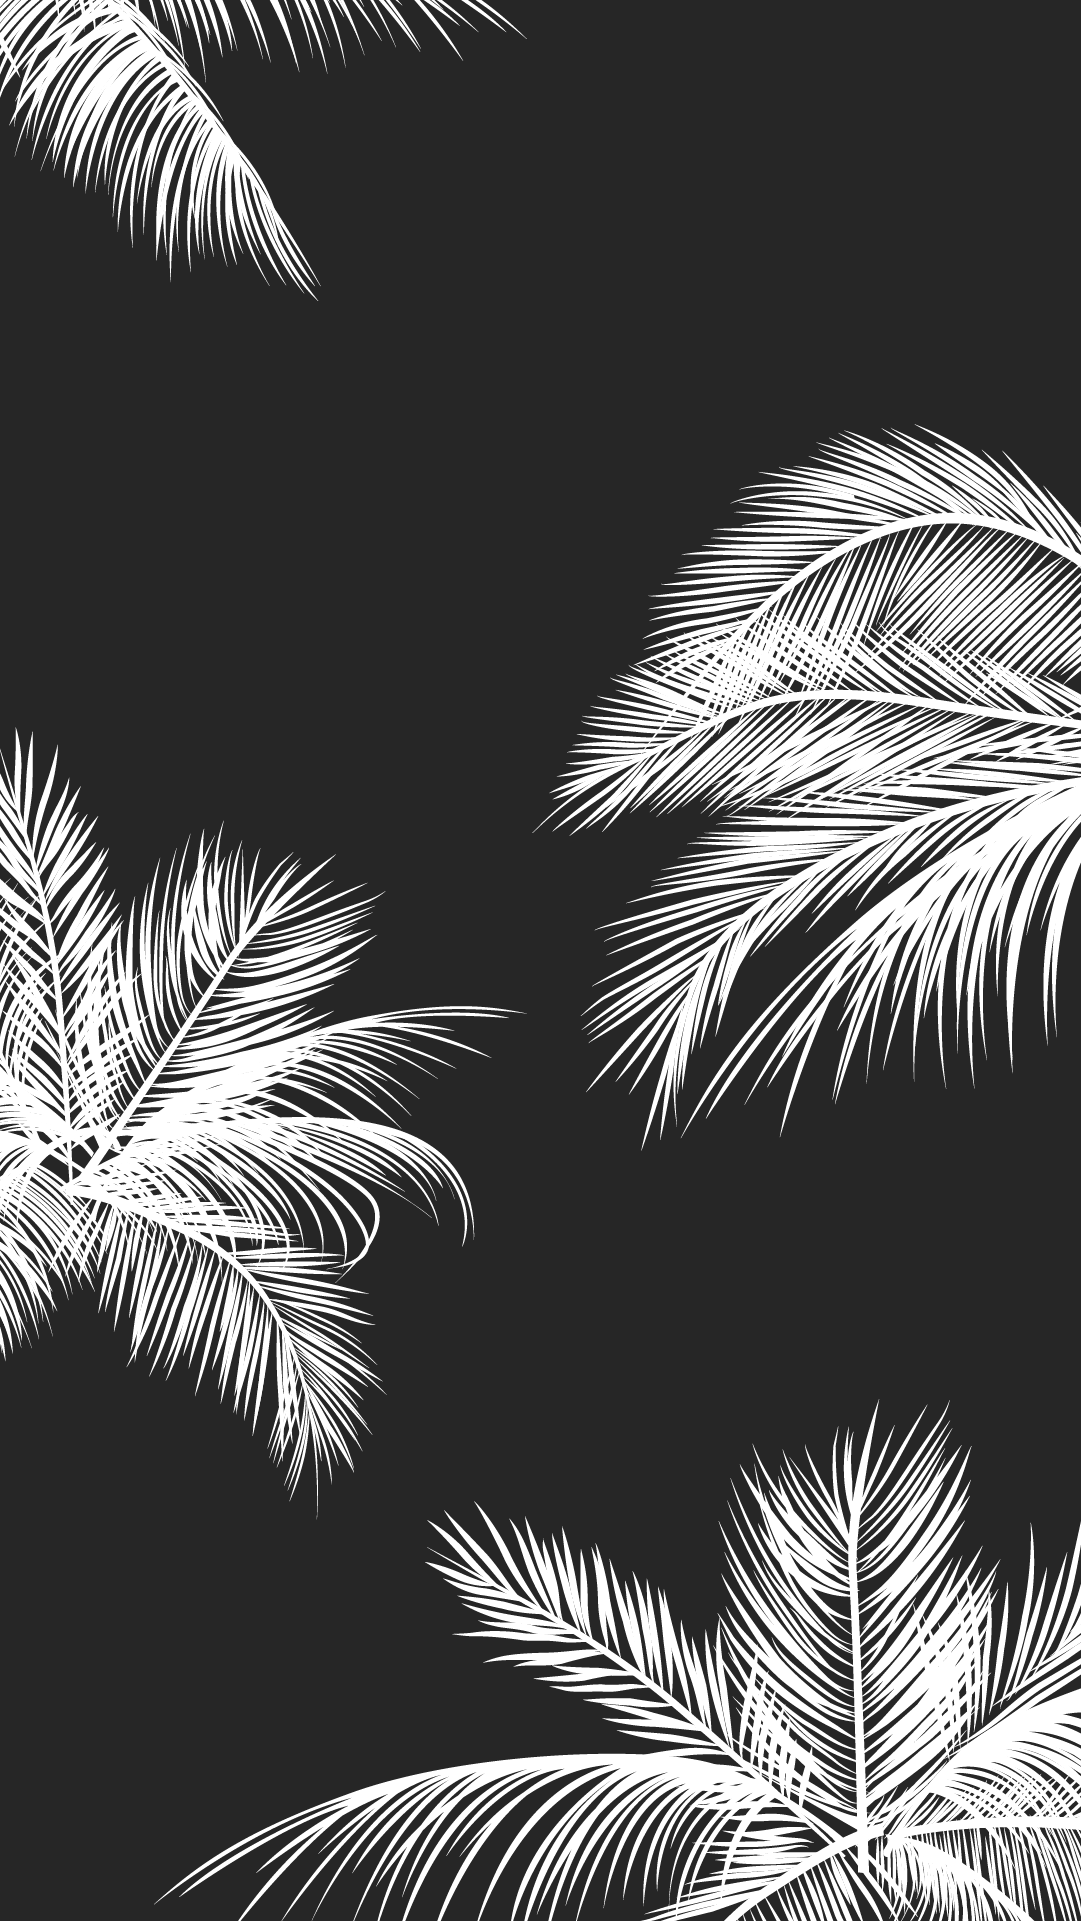 Black And White Iphone Wallpapers Top Free Black And White Iphone Backgrounds Wallpaperaccess,Simple Island Kitchen Design Ideas